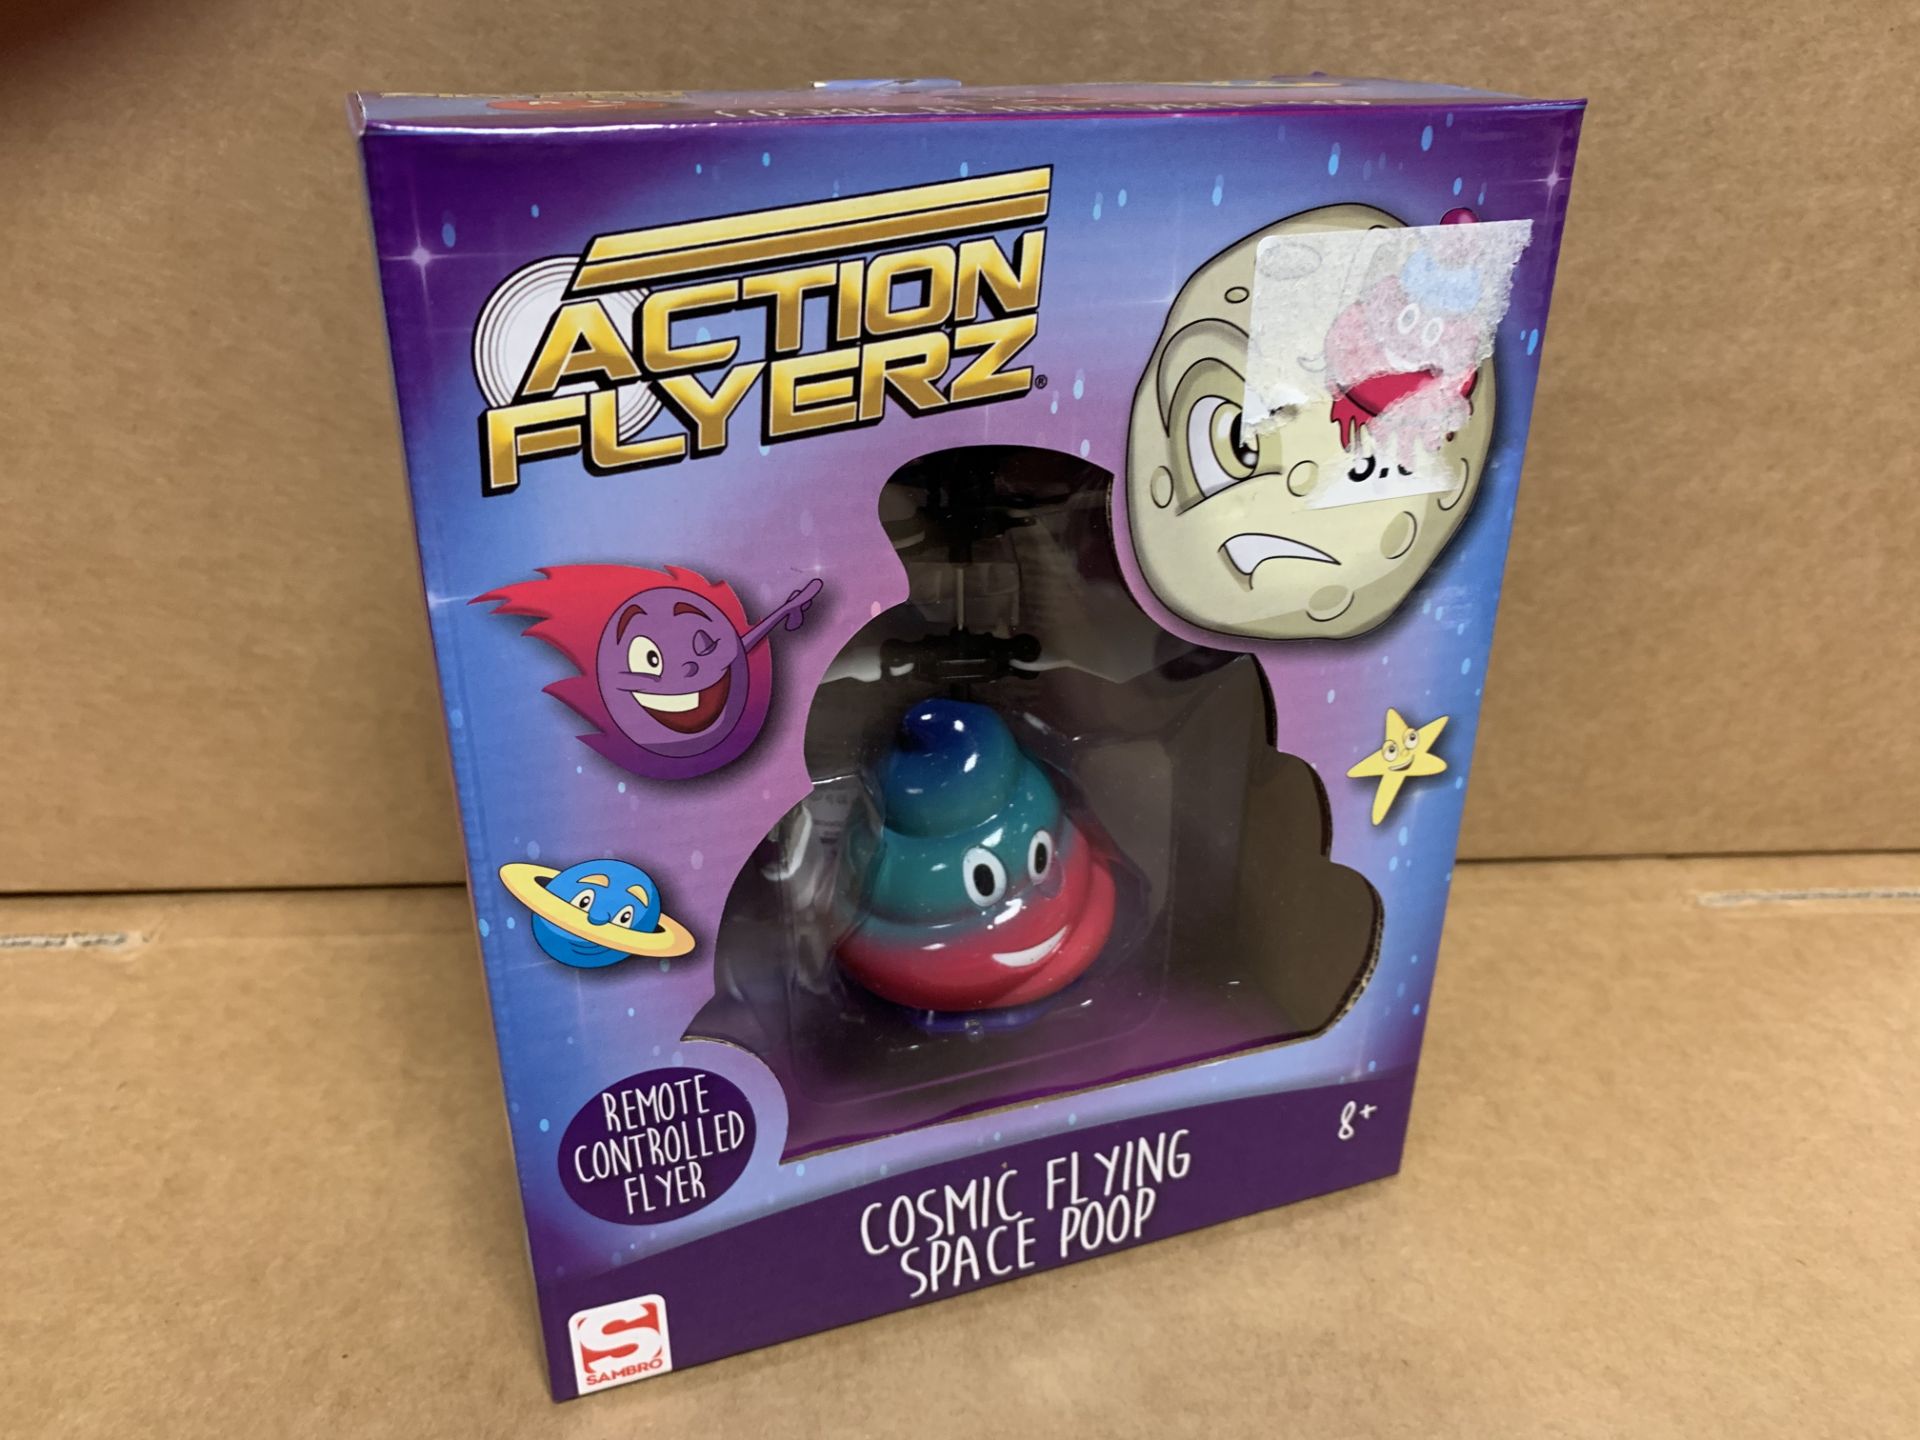 24 x NEW PACKAGED ACTION FLYERZ REMOTE CONTROLLED COSMIC FLYING SPACE POOP